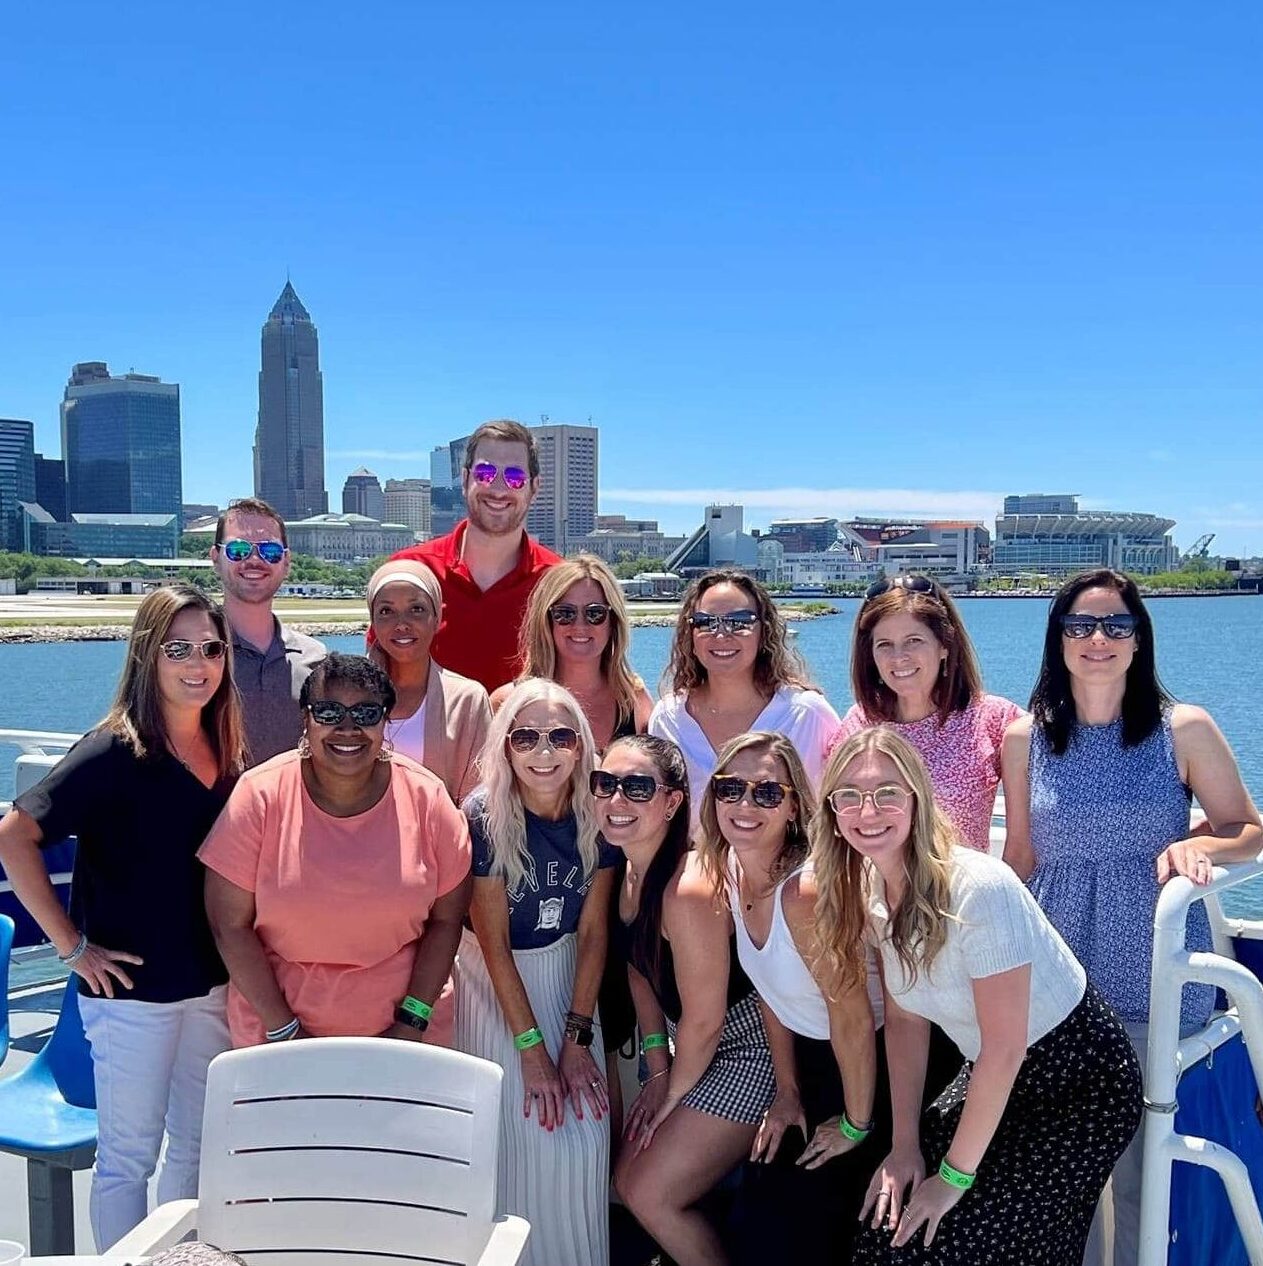 Operations Outing - Cleveland Goodtime Cruise - Research Jobs & Internships - Cleveland, Ohio - Research Careers